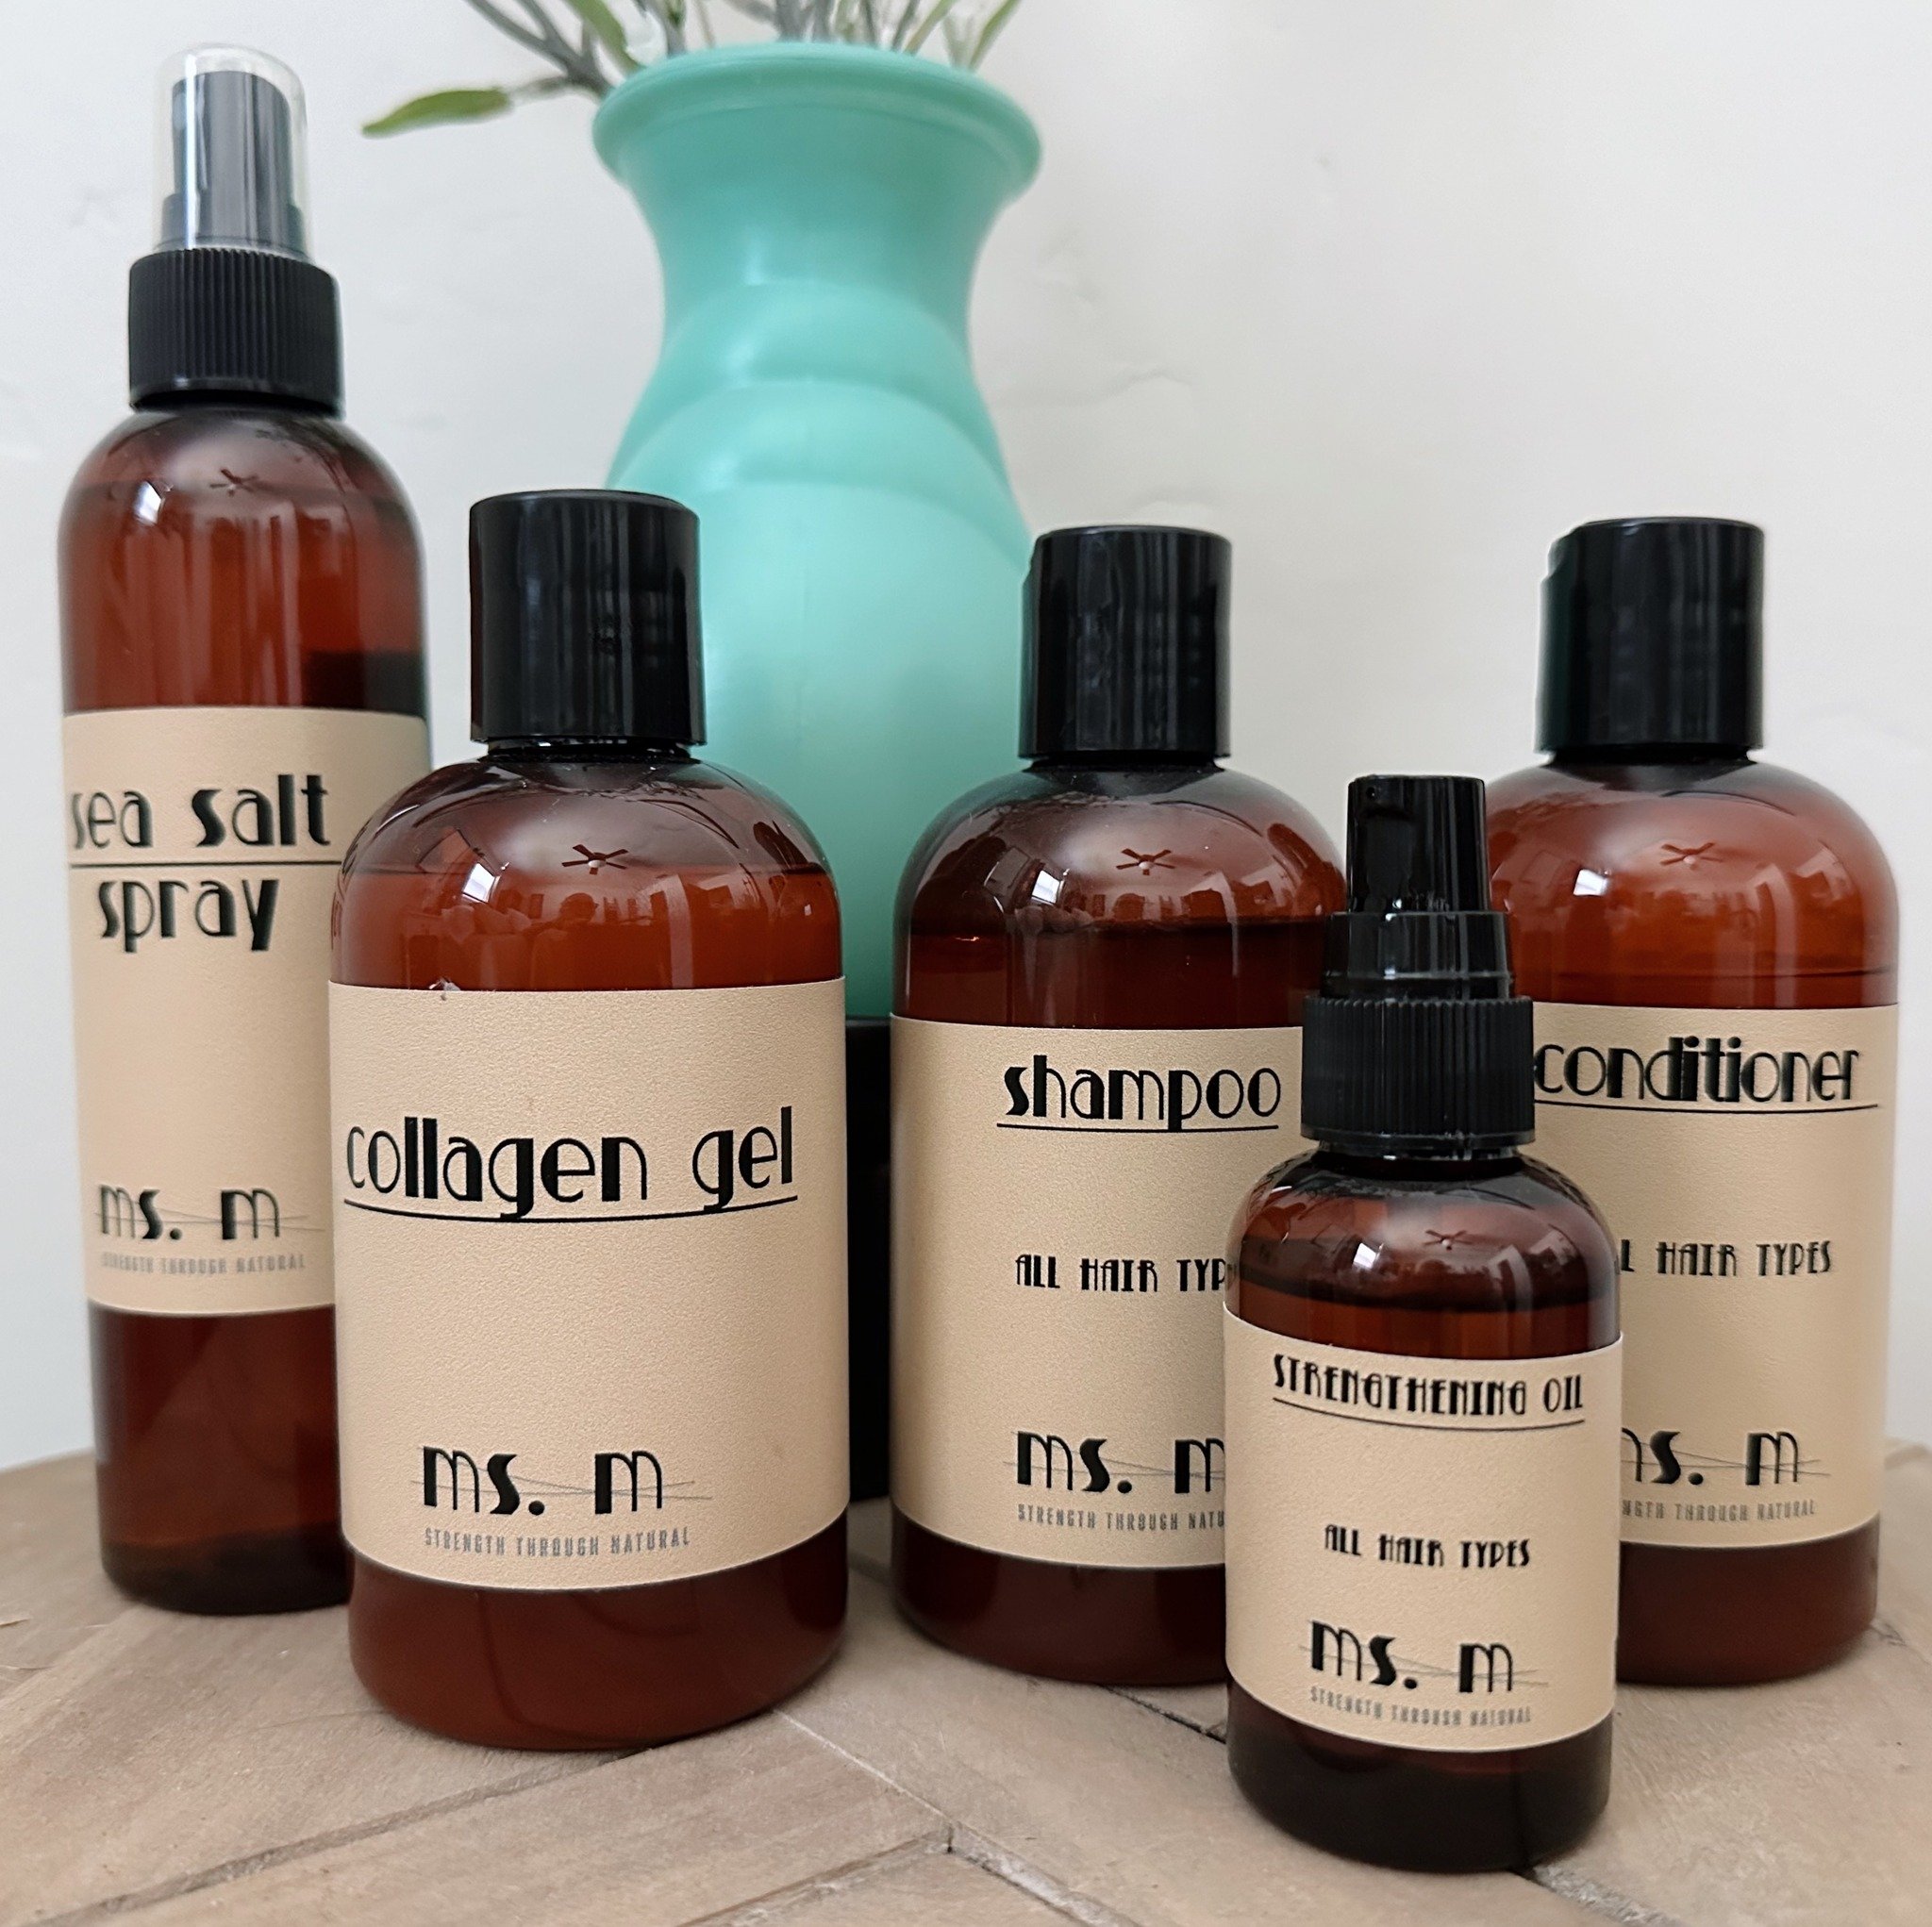 Nourish your hair and skin with our proprietary blend of natural oils and botanical extracts. Strengthen each strand and moisturize your scalp for healthier, more resilient hair! 

#clovisnm #allinclovis #hairstylistnearme #hairsalonclovisnm #natural